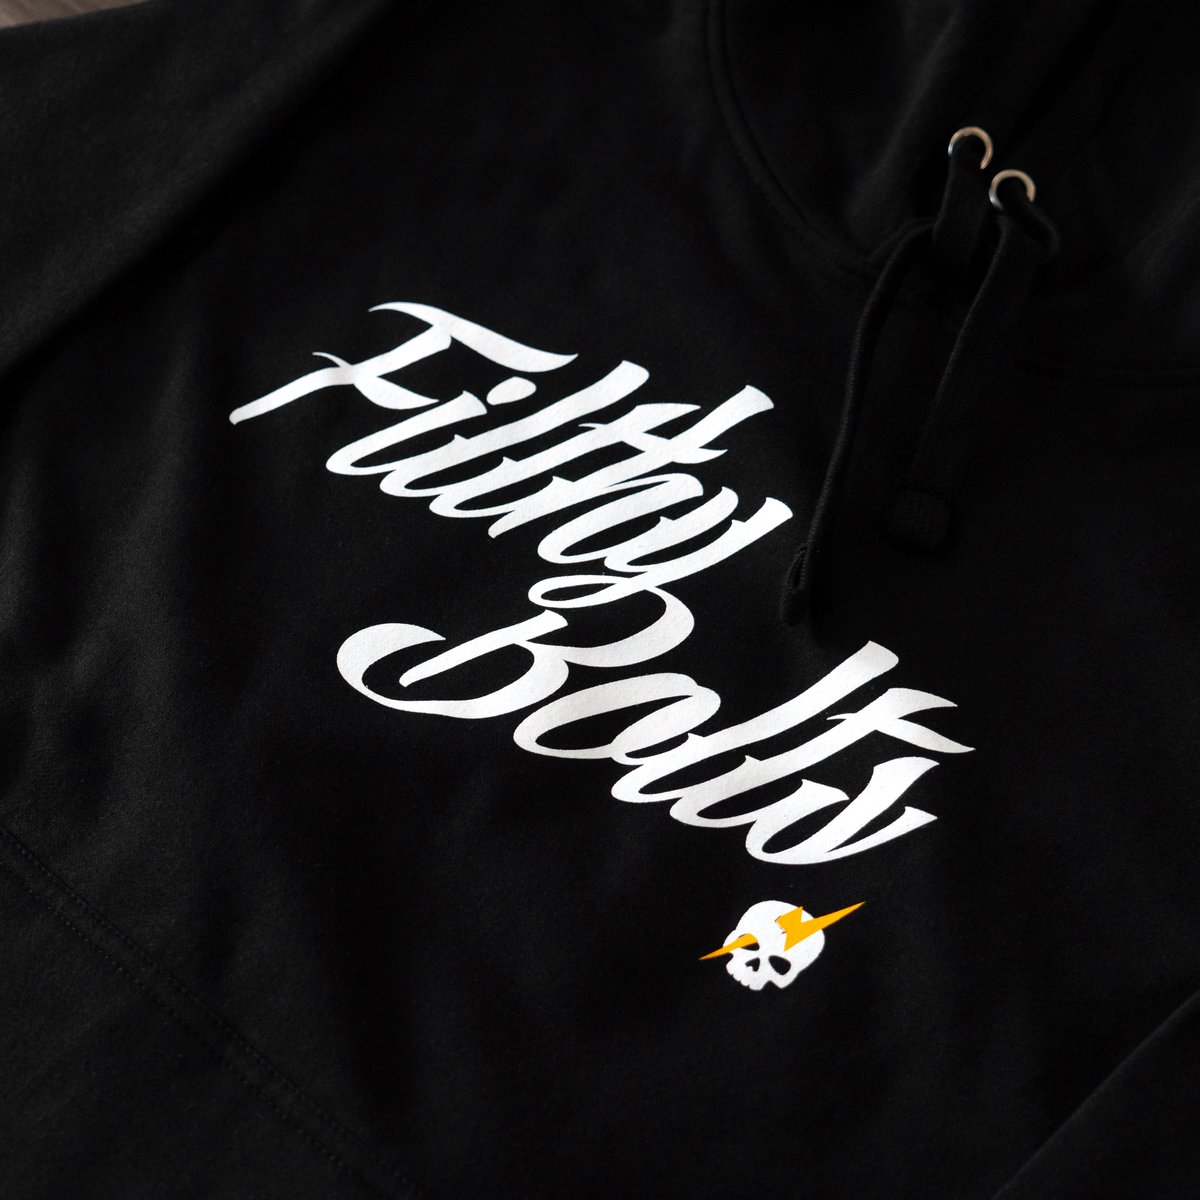 Filthy Bolts Hoodie